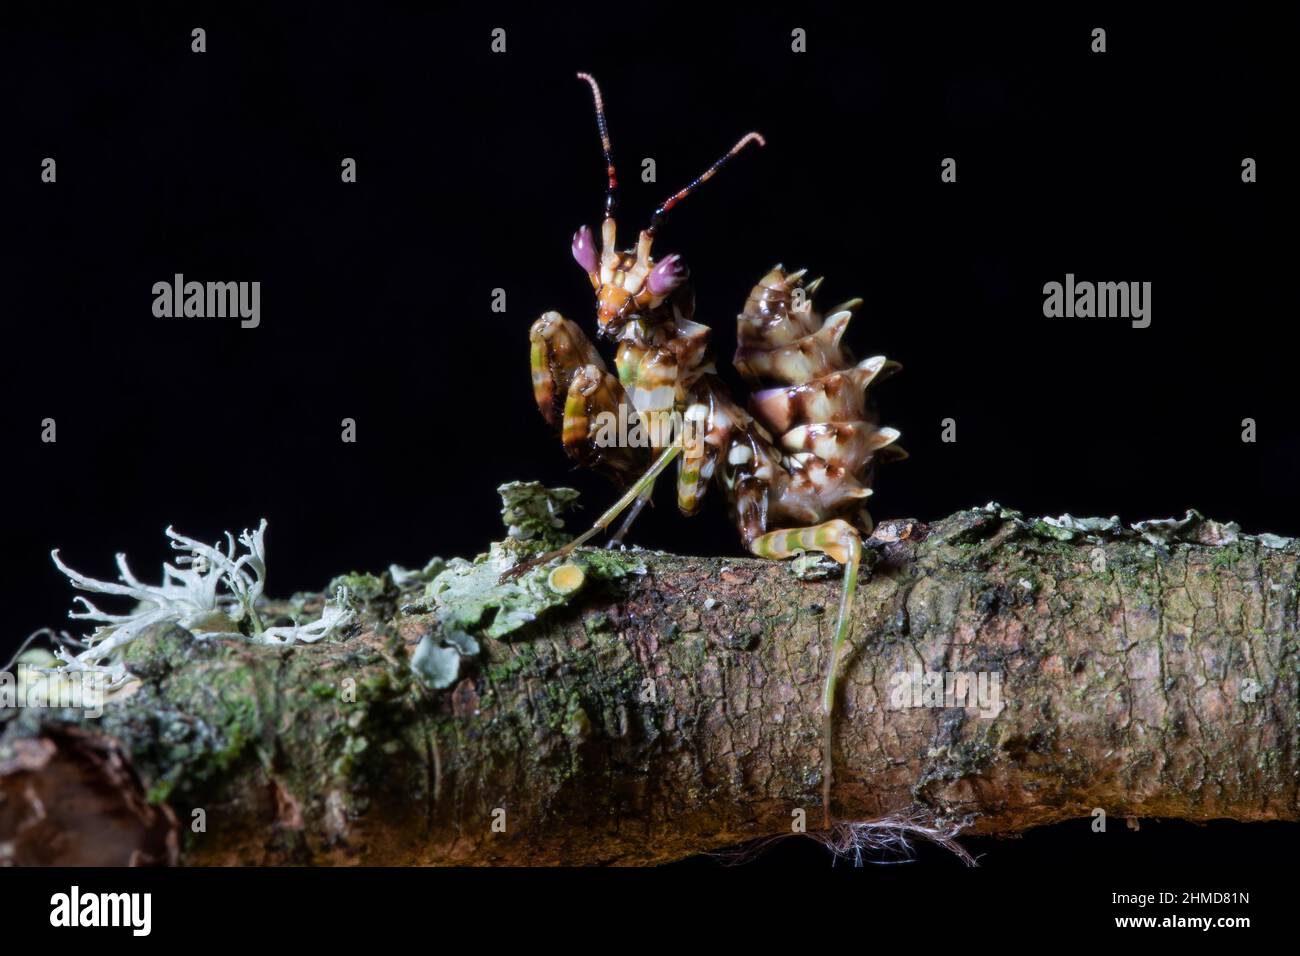 A close up of a L3 Spiney Flower Mantis nymph, crawling across a moss covered branch Stock Photo